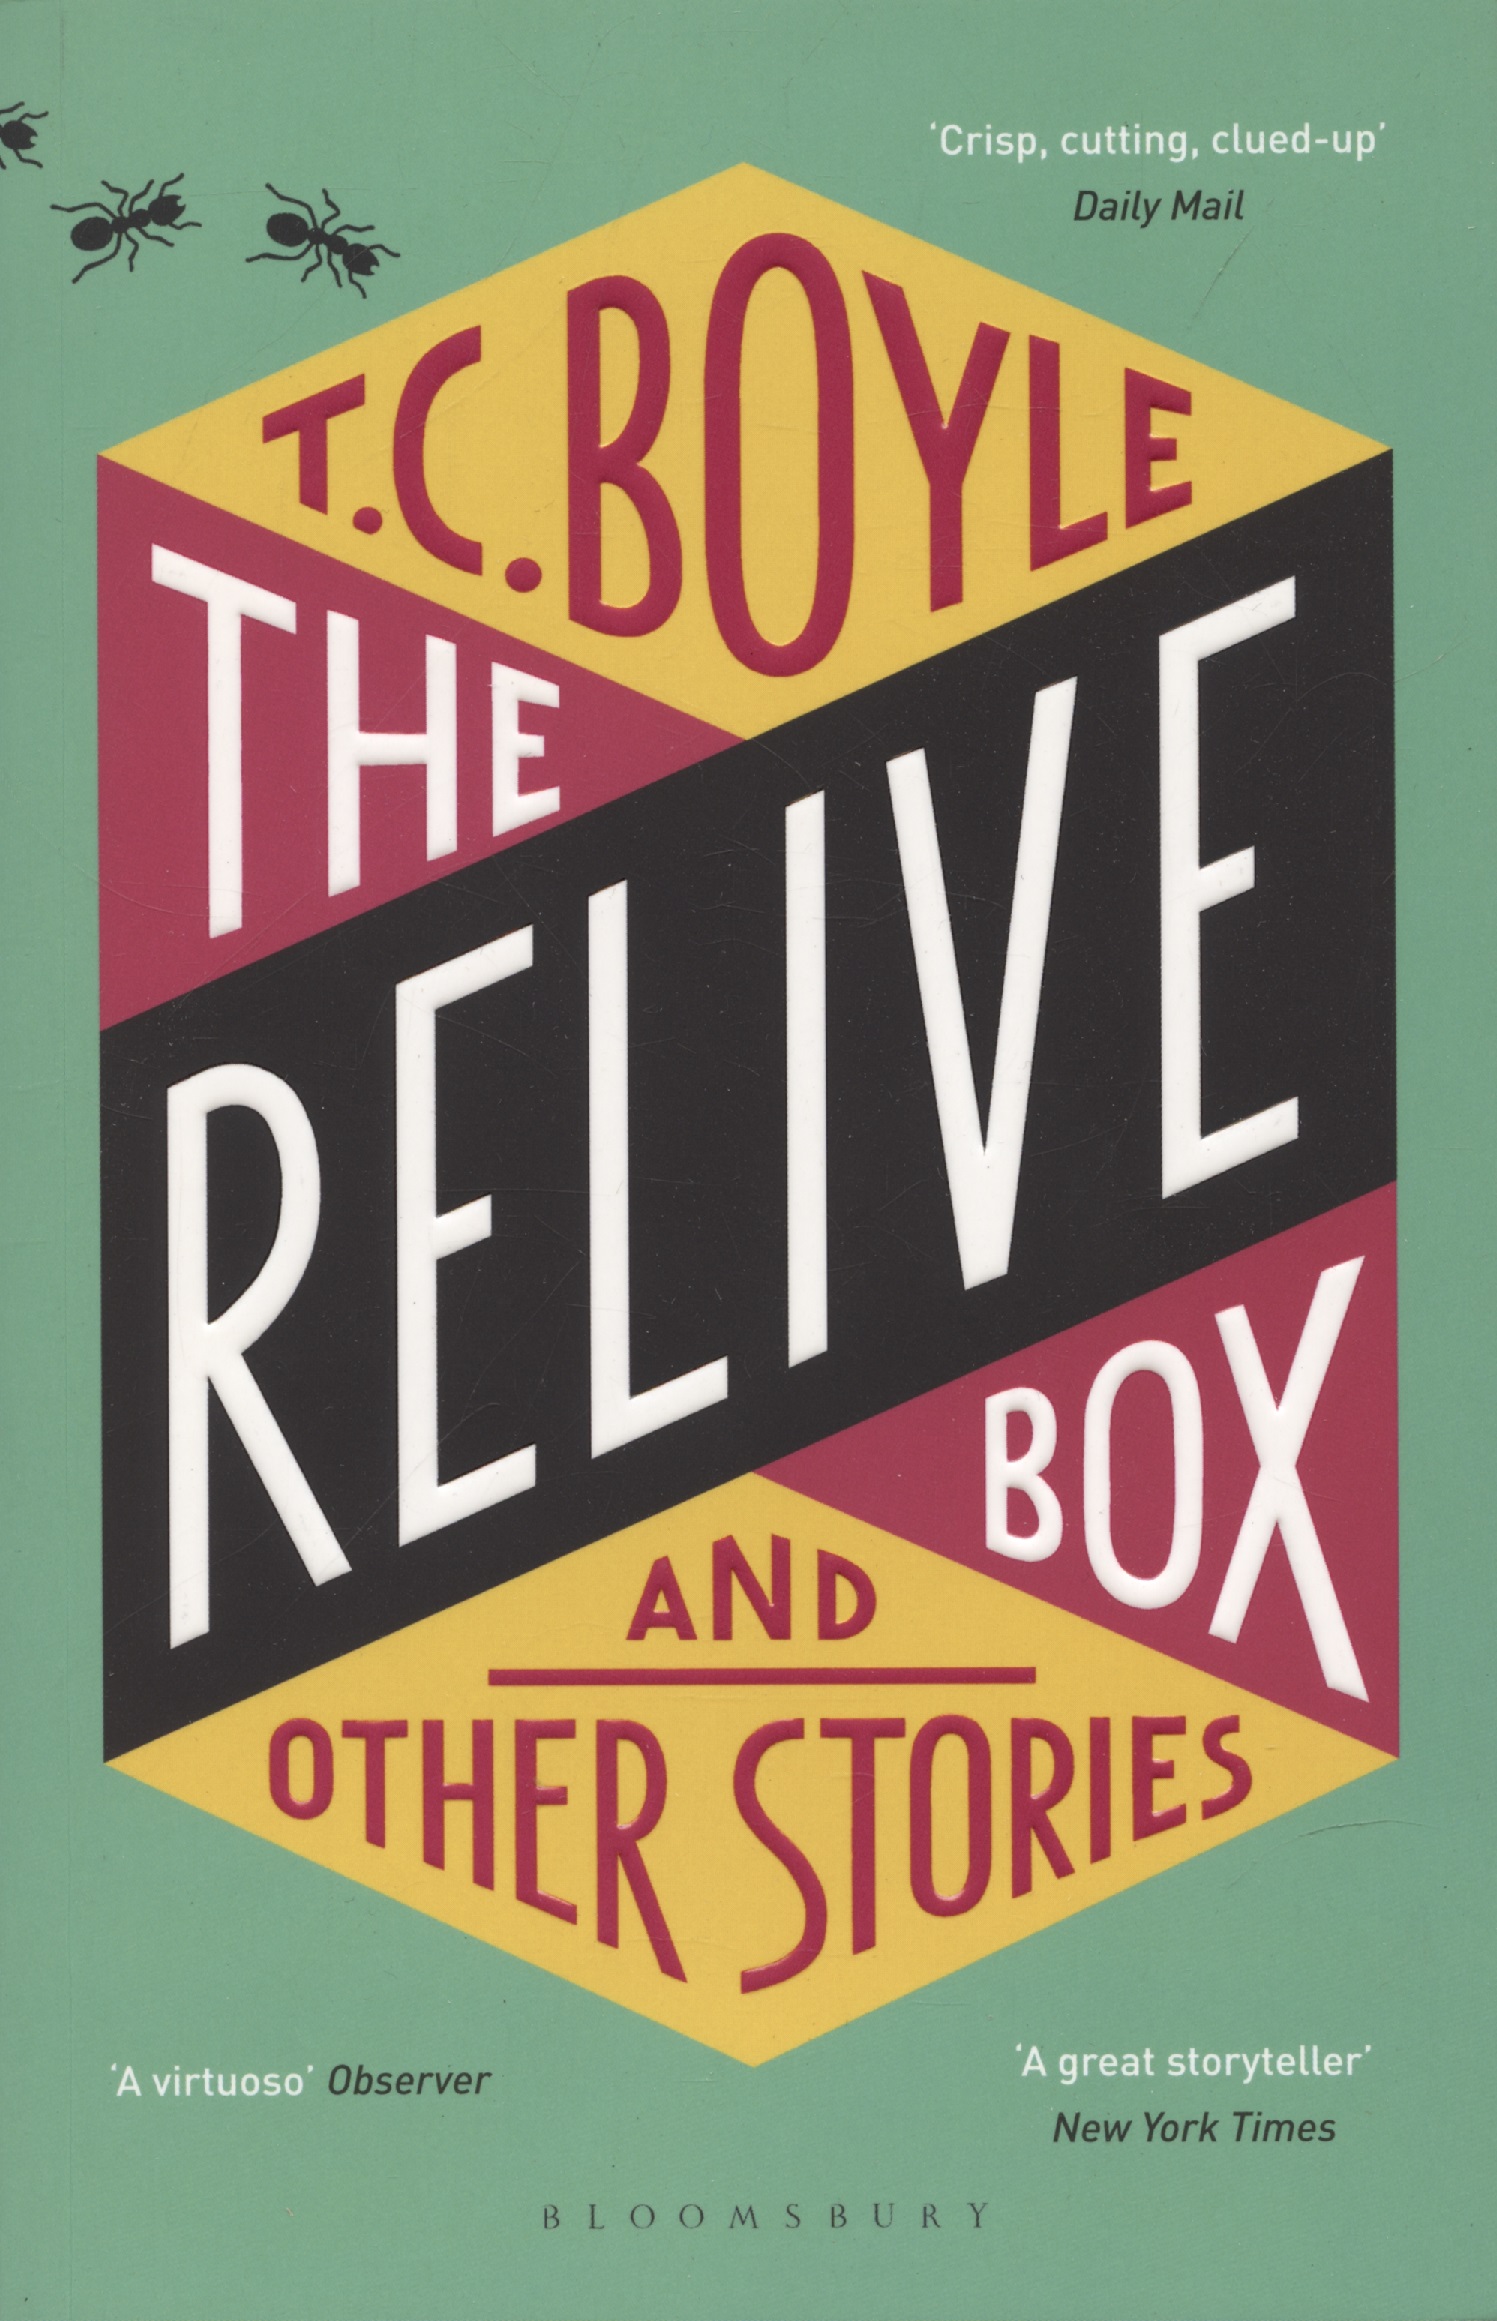 boyle t c the tortilla curtain Boyle T. Coraghessan The Relive Box and Other Stories